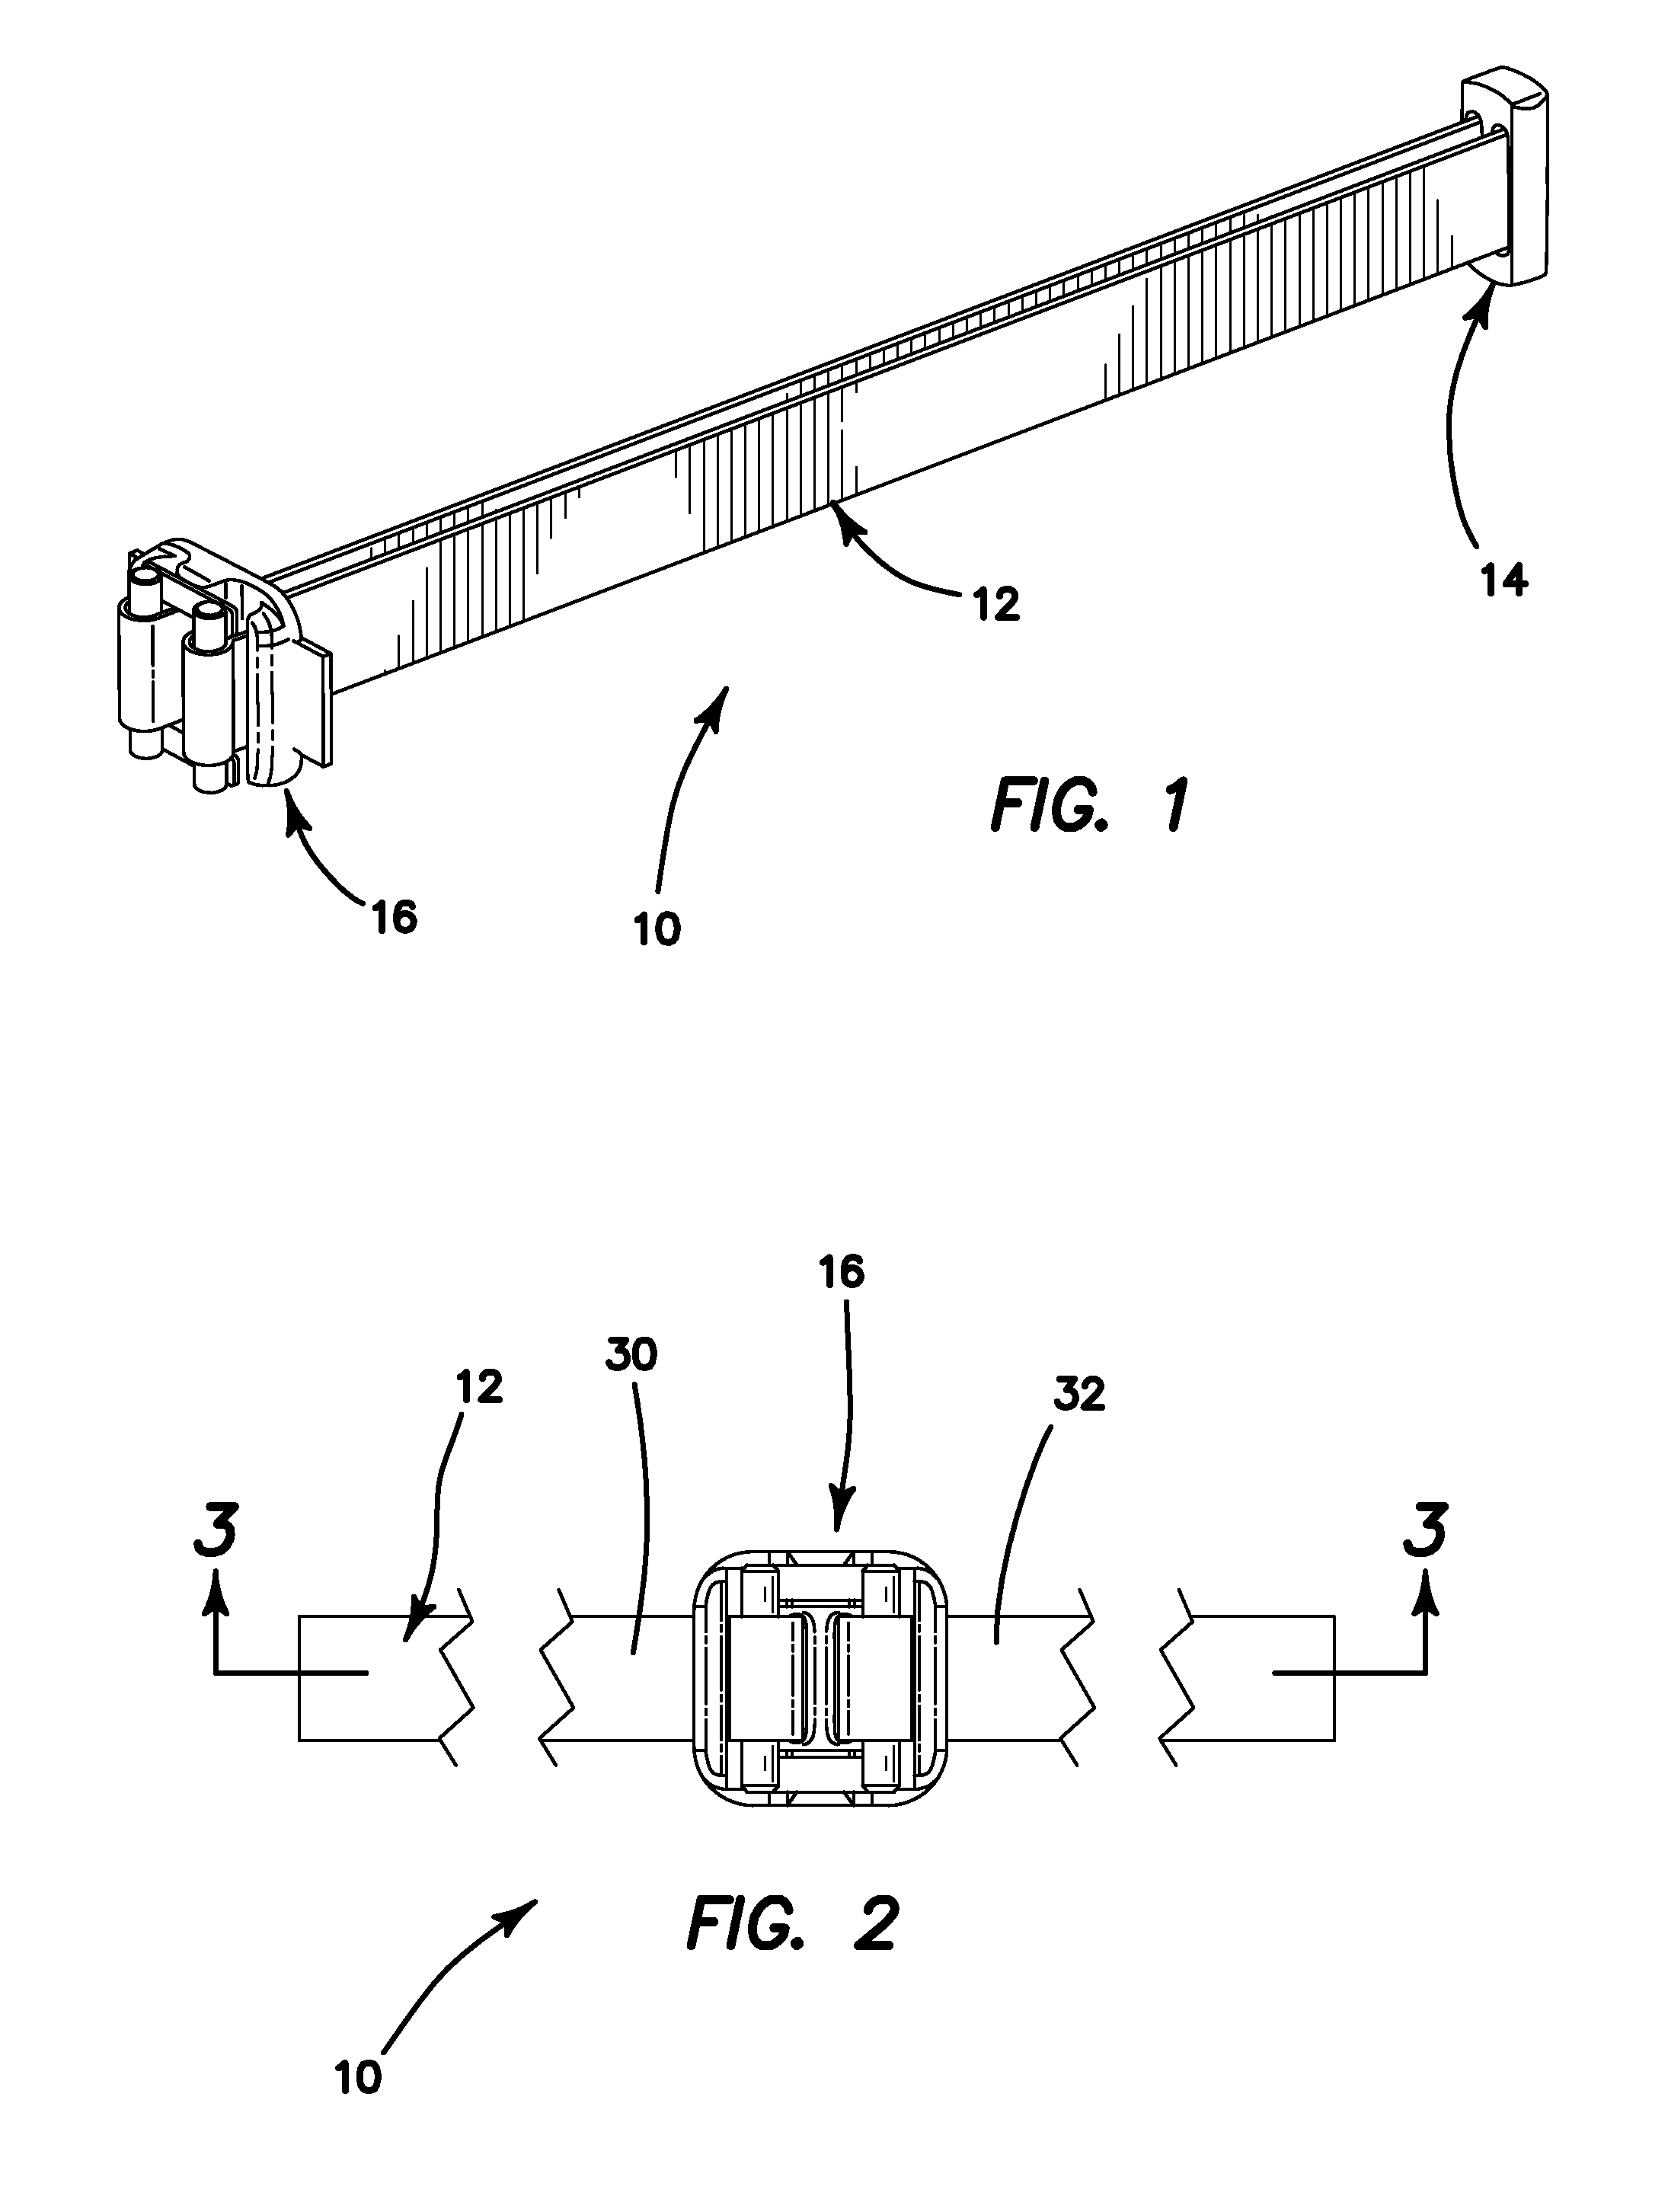 Implant device and system for stabilized fixation of bone and soft tissue